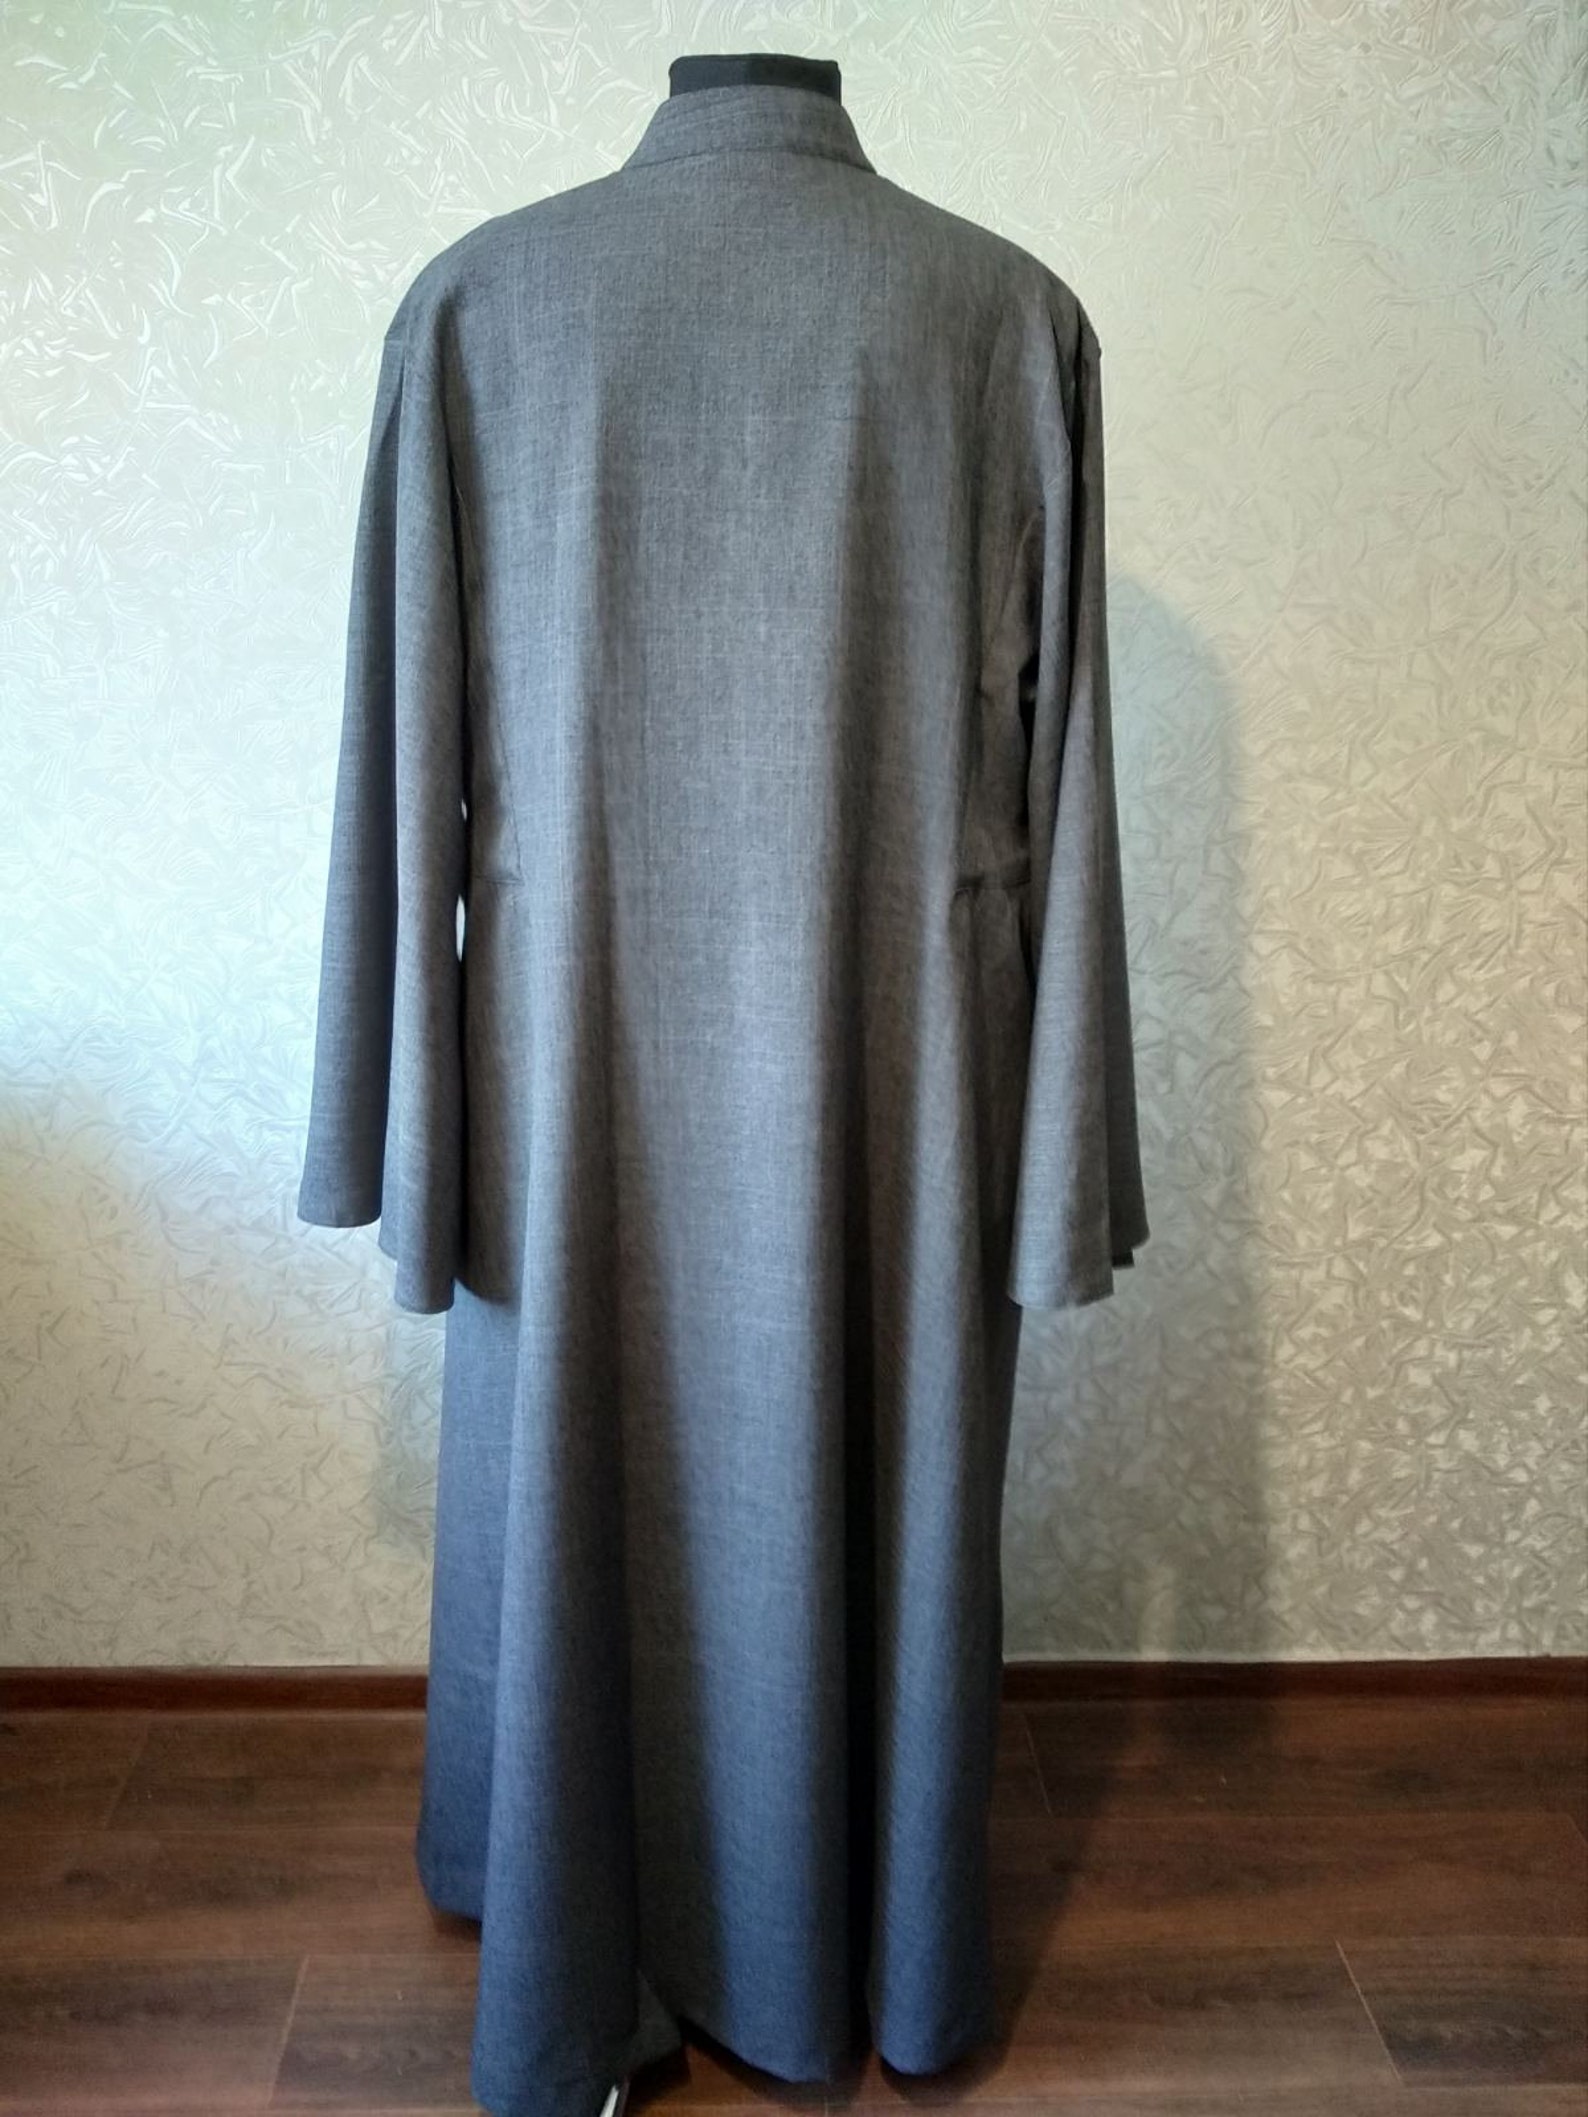 Russian style Orthodox riassa Outer cassock Orthodox outer | Etsy